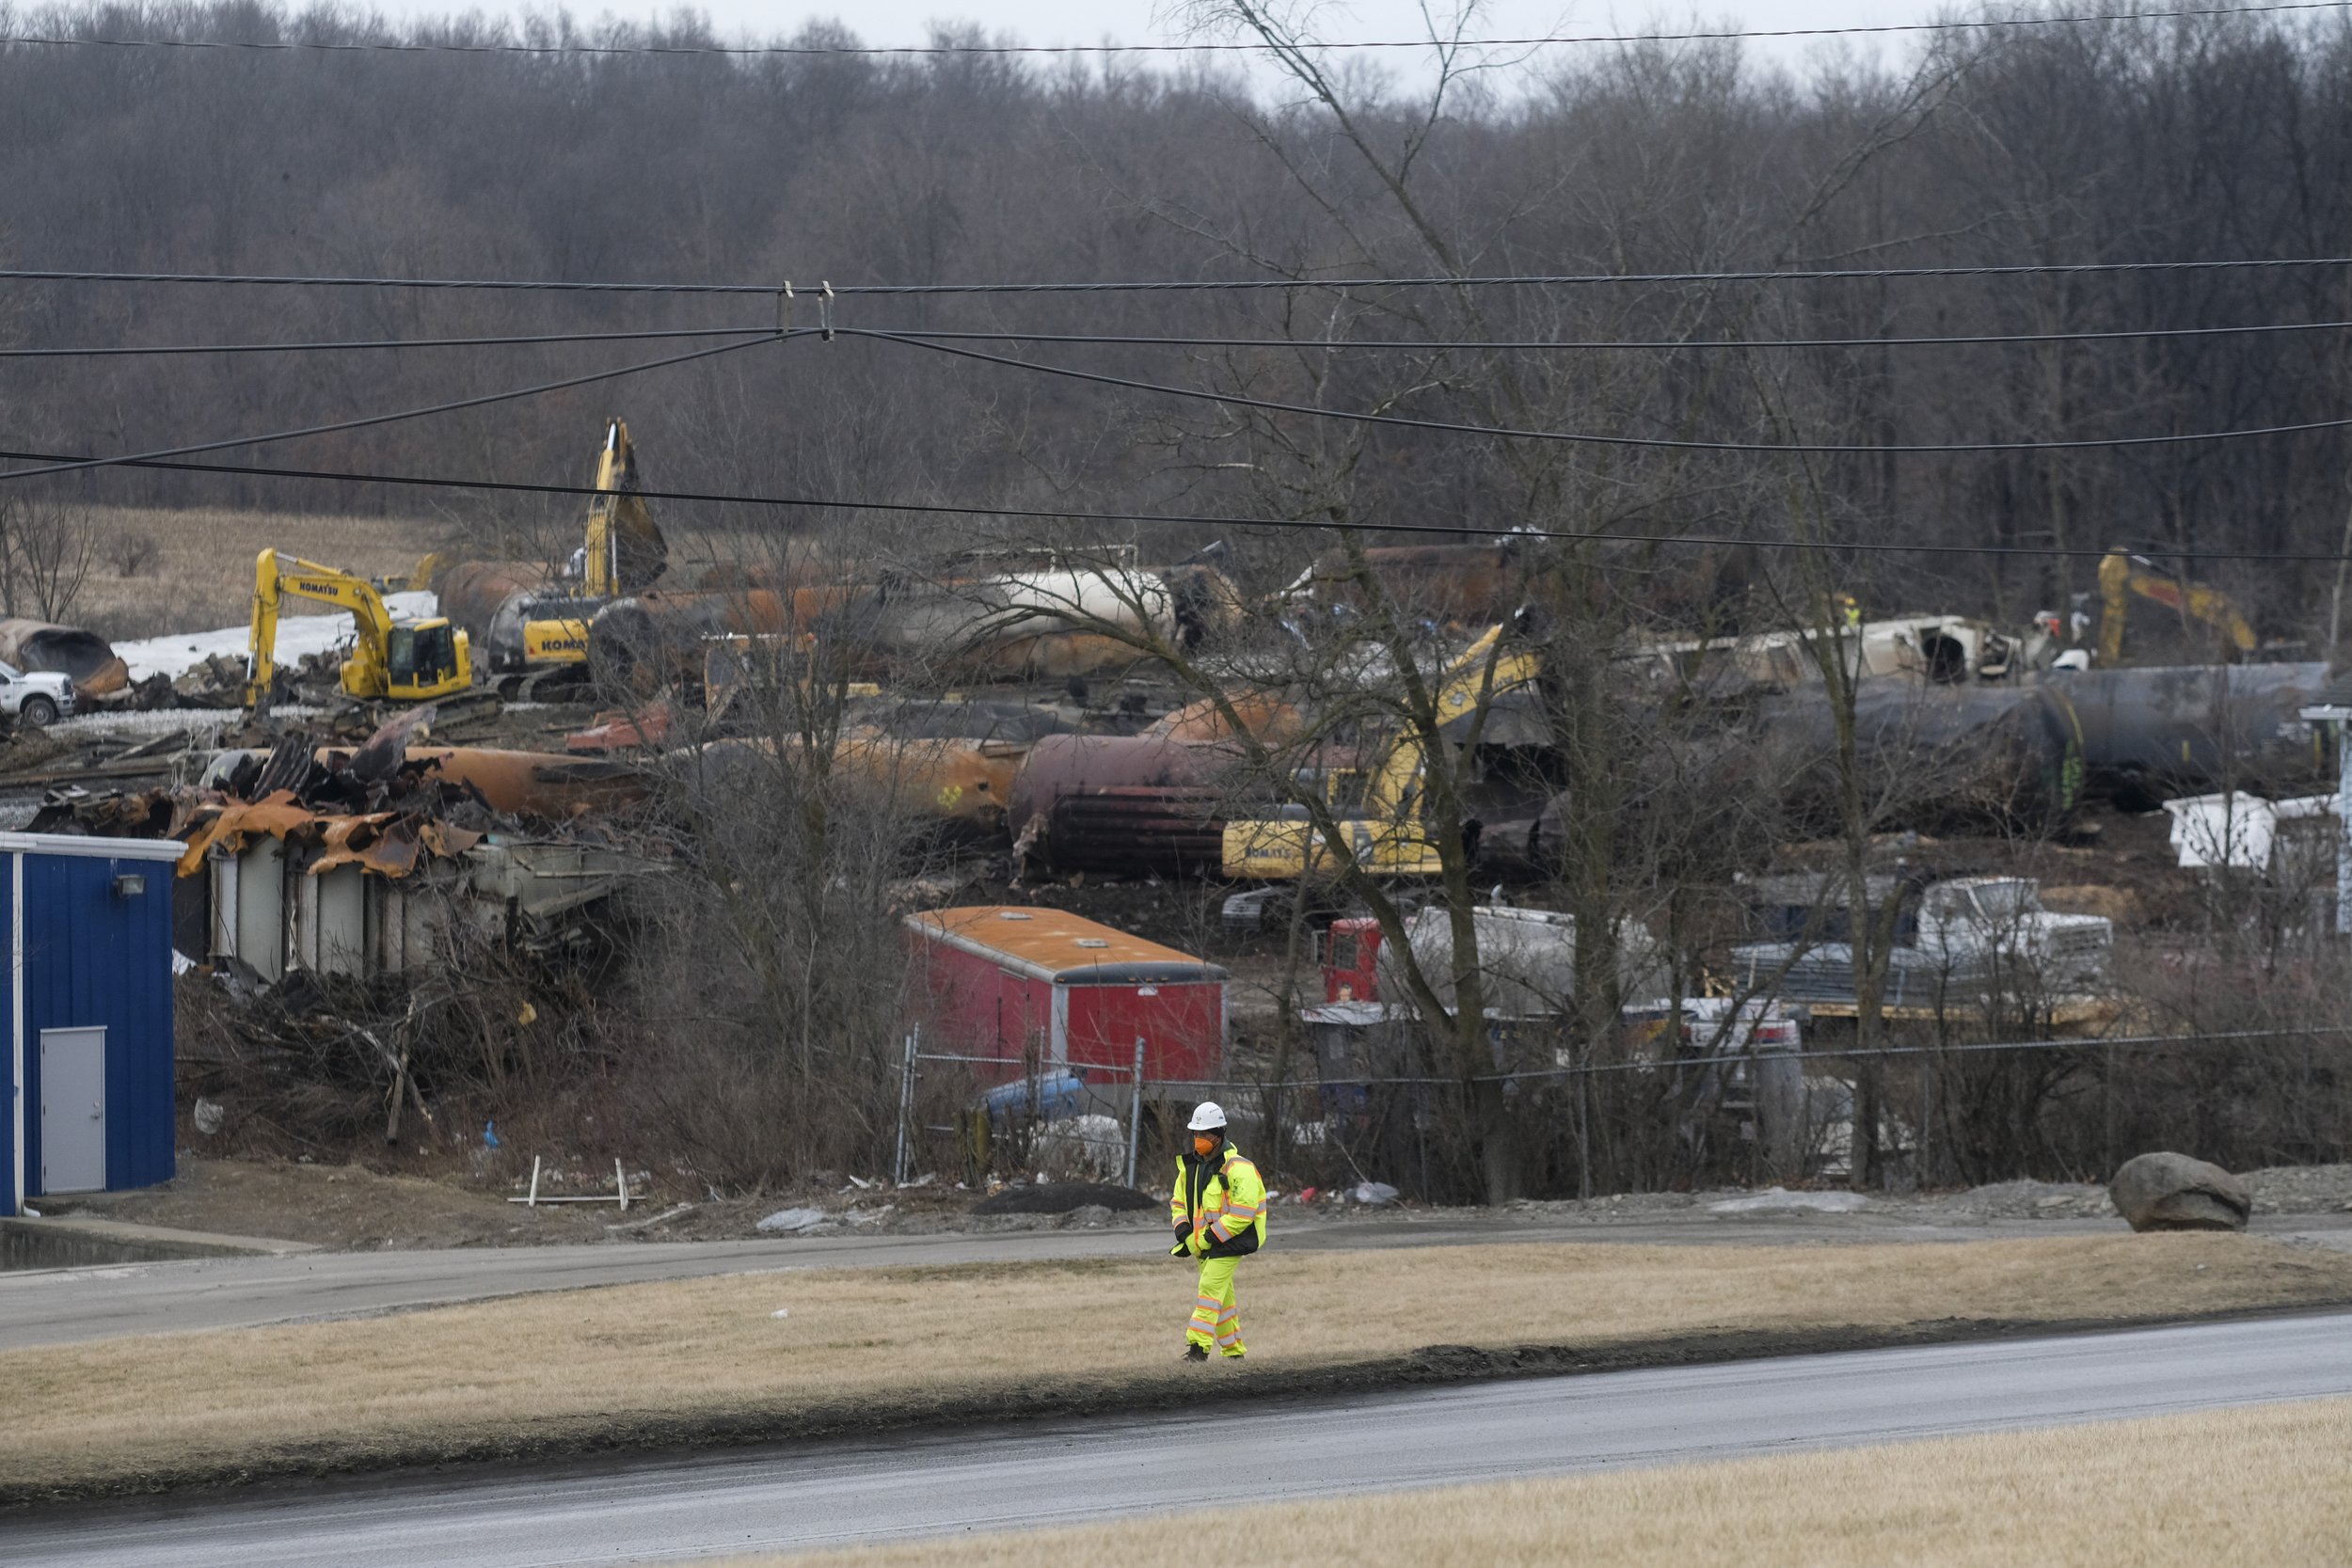  A clean up crew worker walks down East Taggart Street during clean up operations near the derailed train in East Palestine, Ohio, US, on Thursday, Feb. 16, 2023. Nearly two weeks after a train carrying carcinogenic chemicals derailed in East Palesti